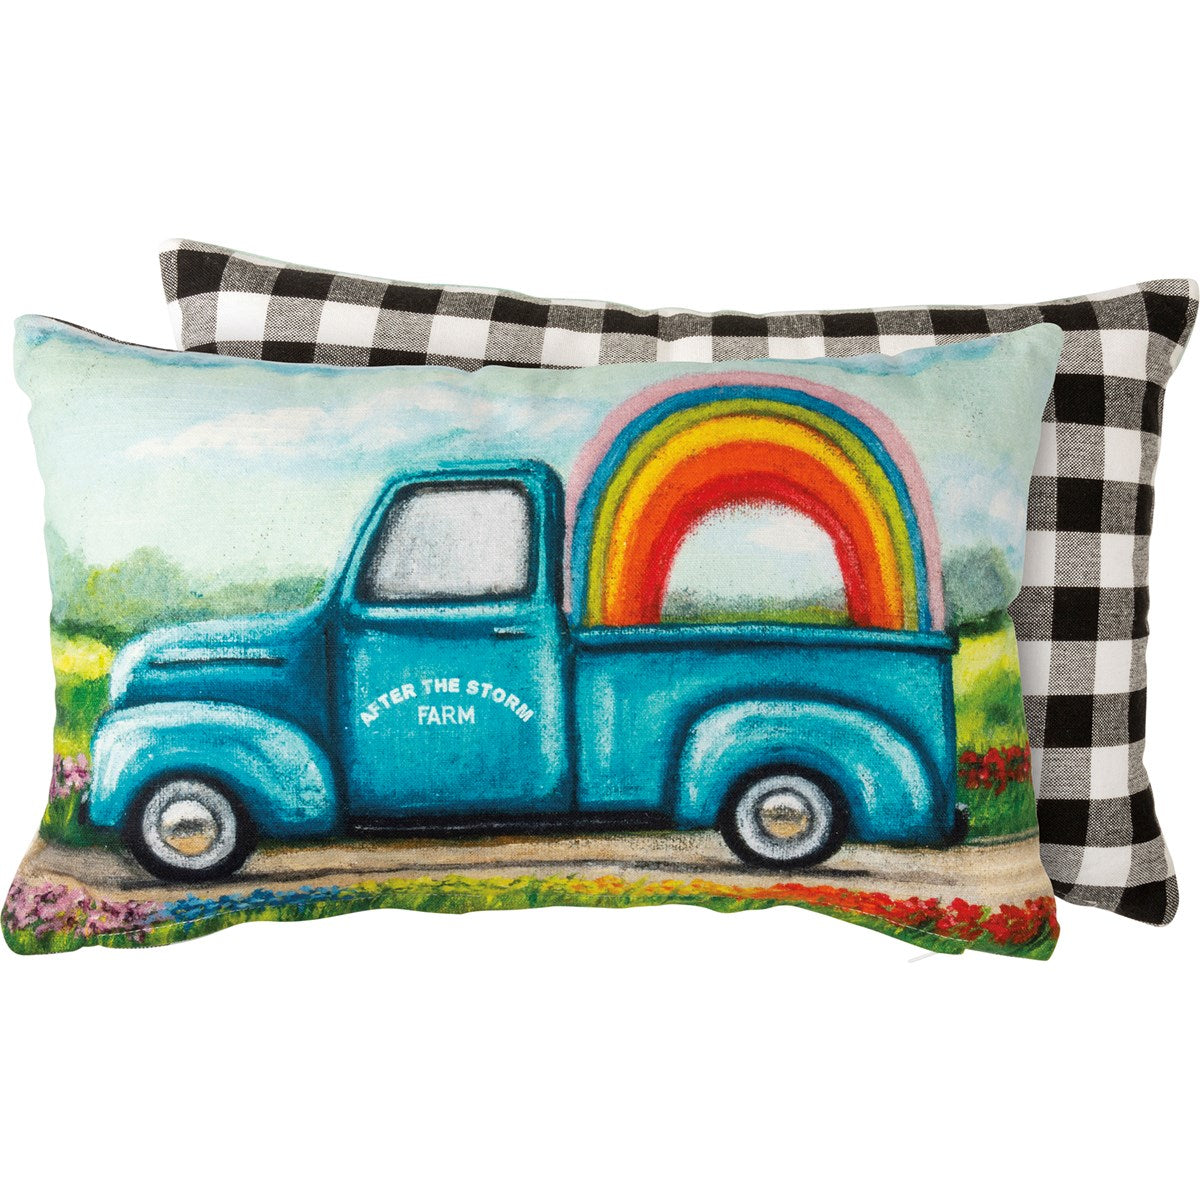 Rainbow After The Storm Farm Pillow